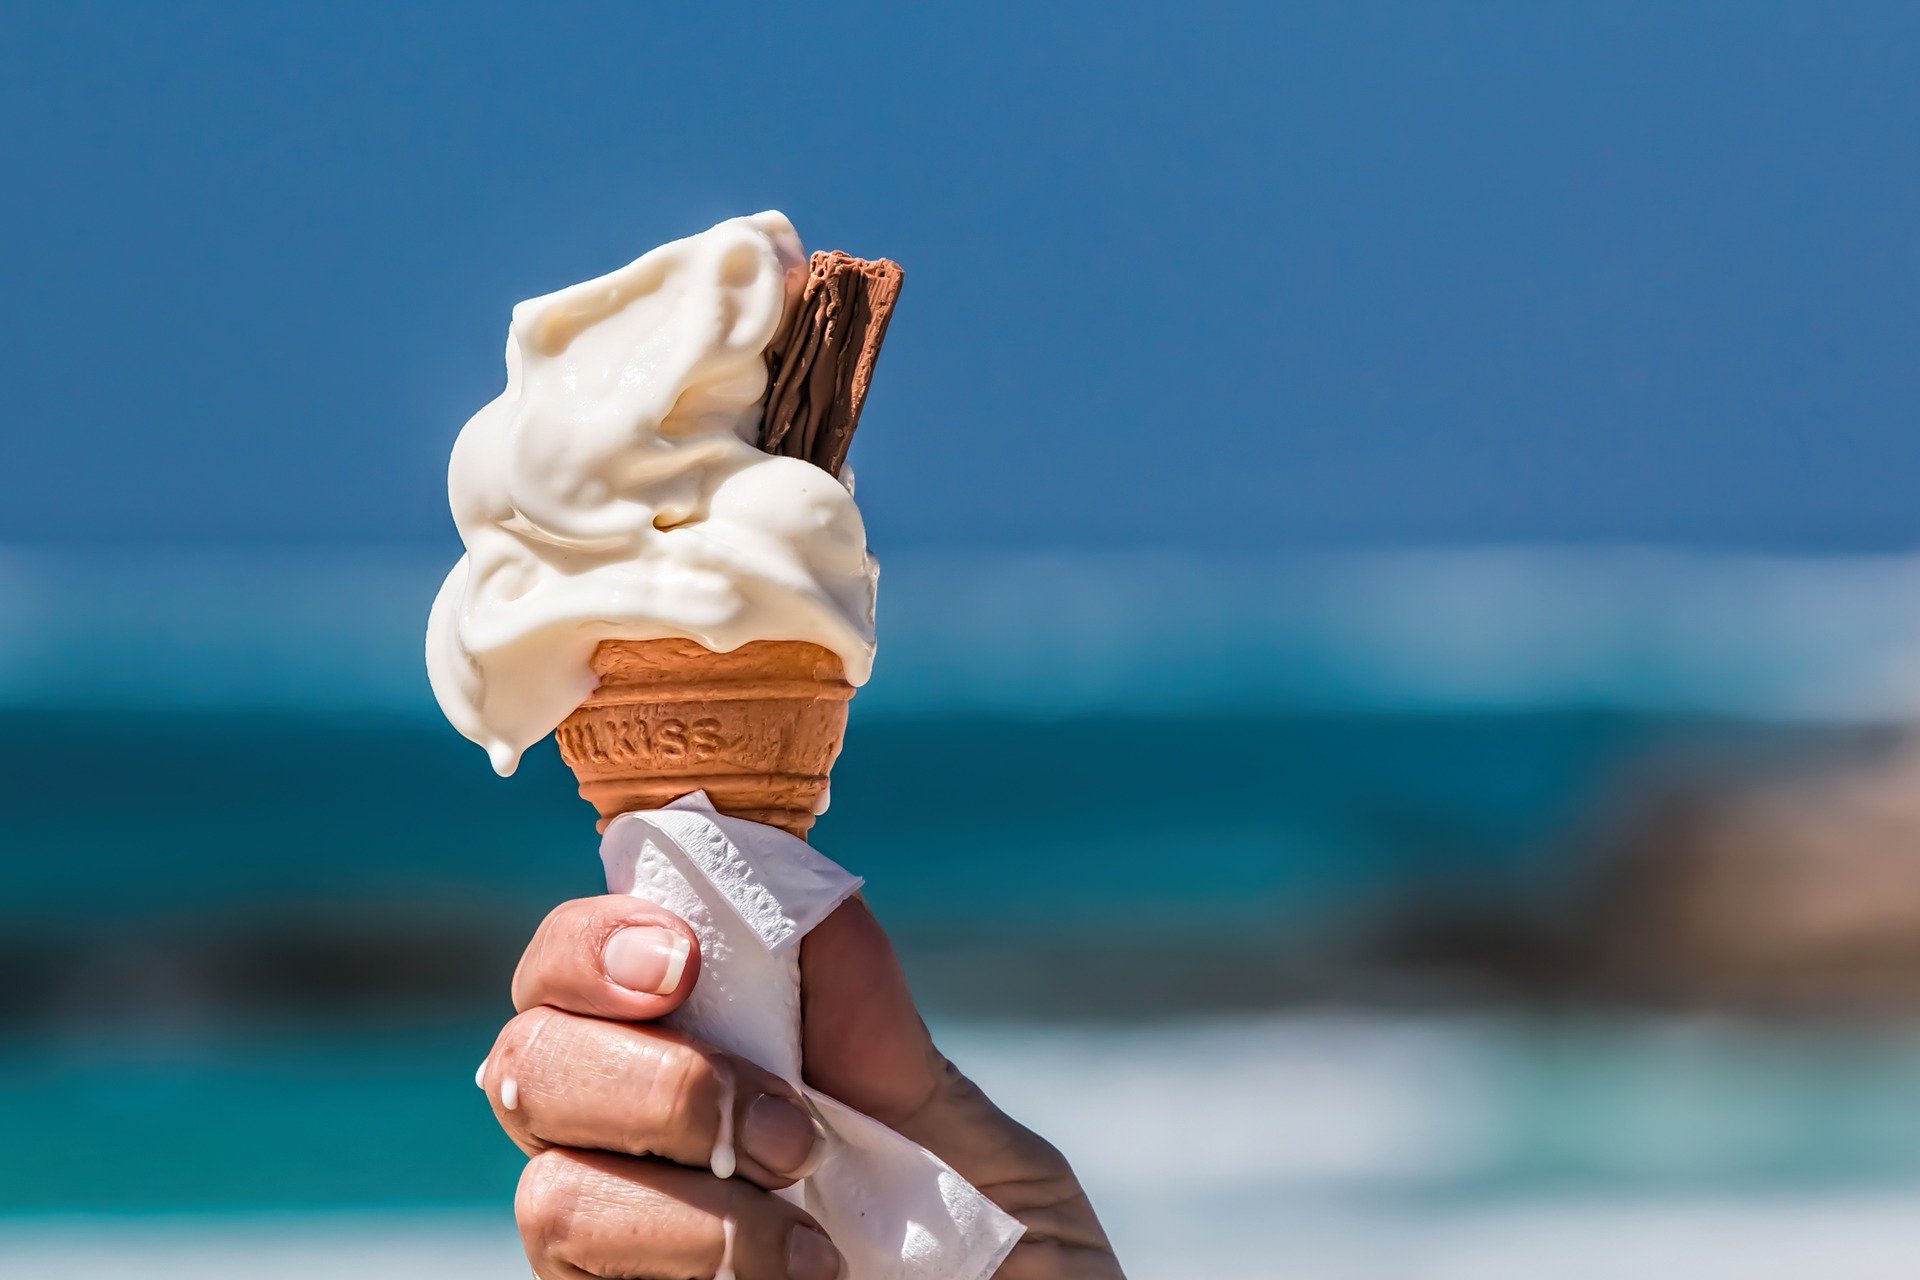 Enjoy ice cream and more on your list of winer Panama City beach events